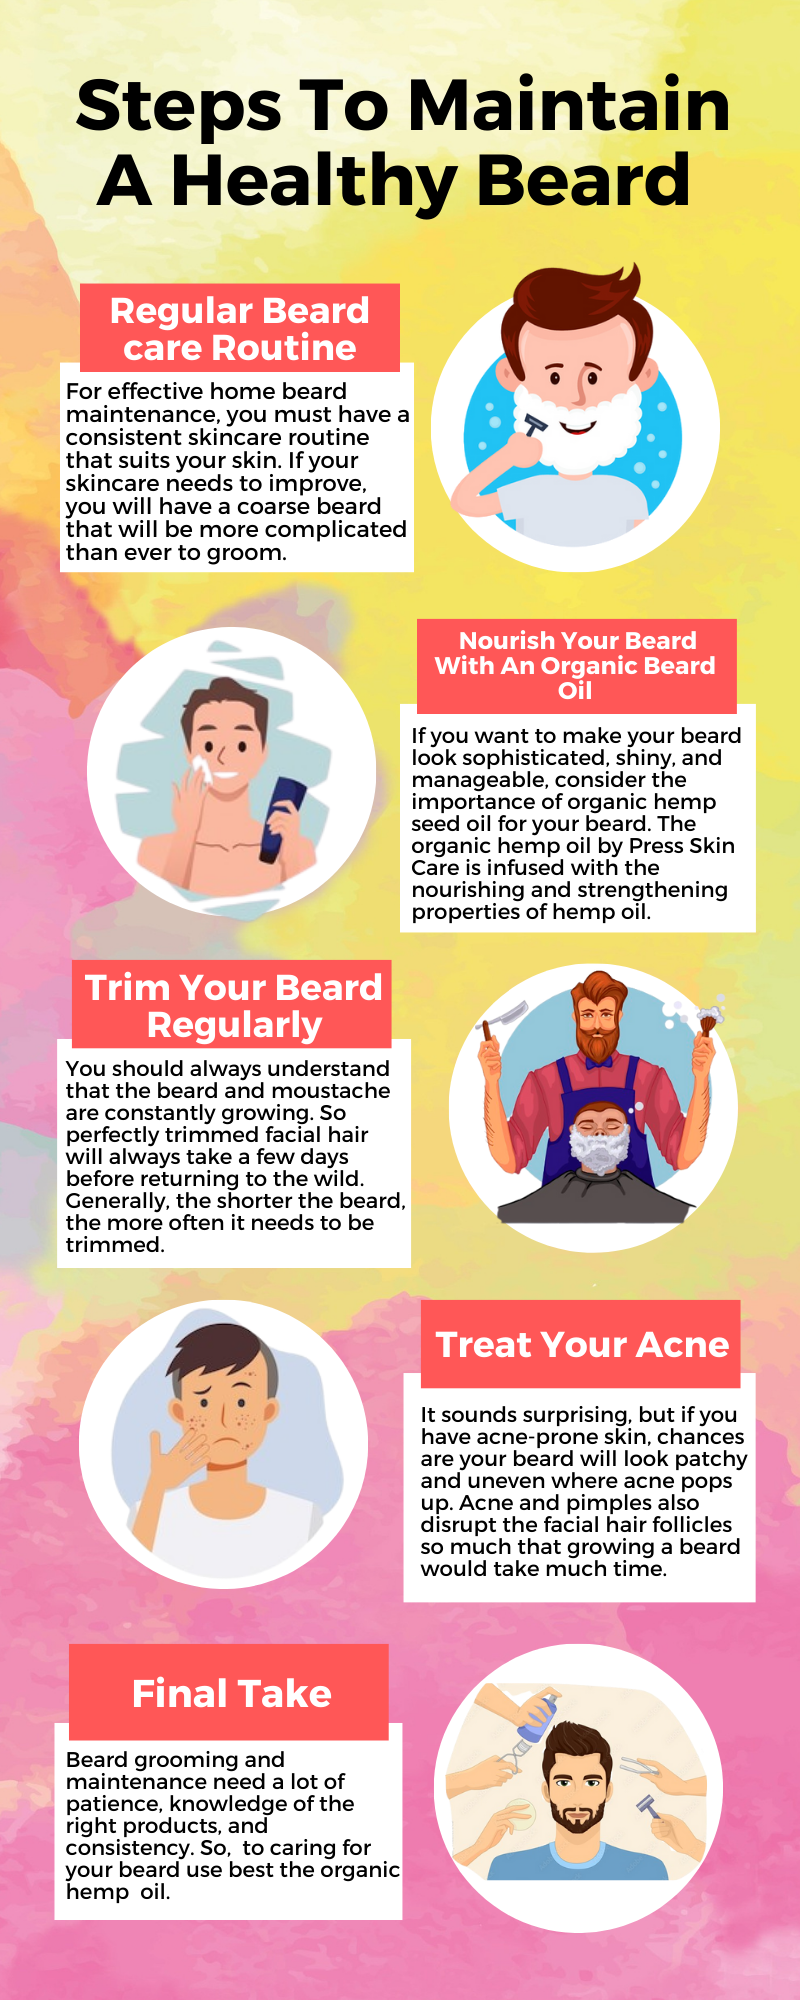 How To Maintain Healthy Beard? Best Products And Tools?